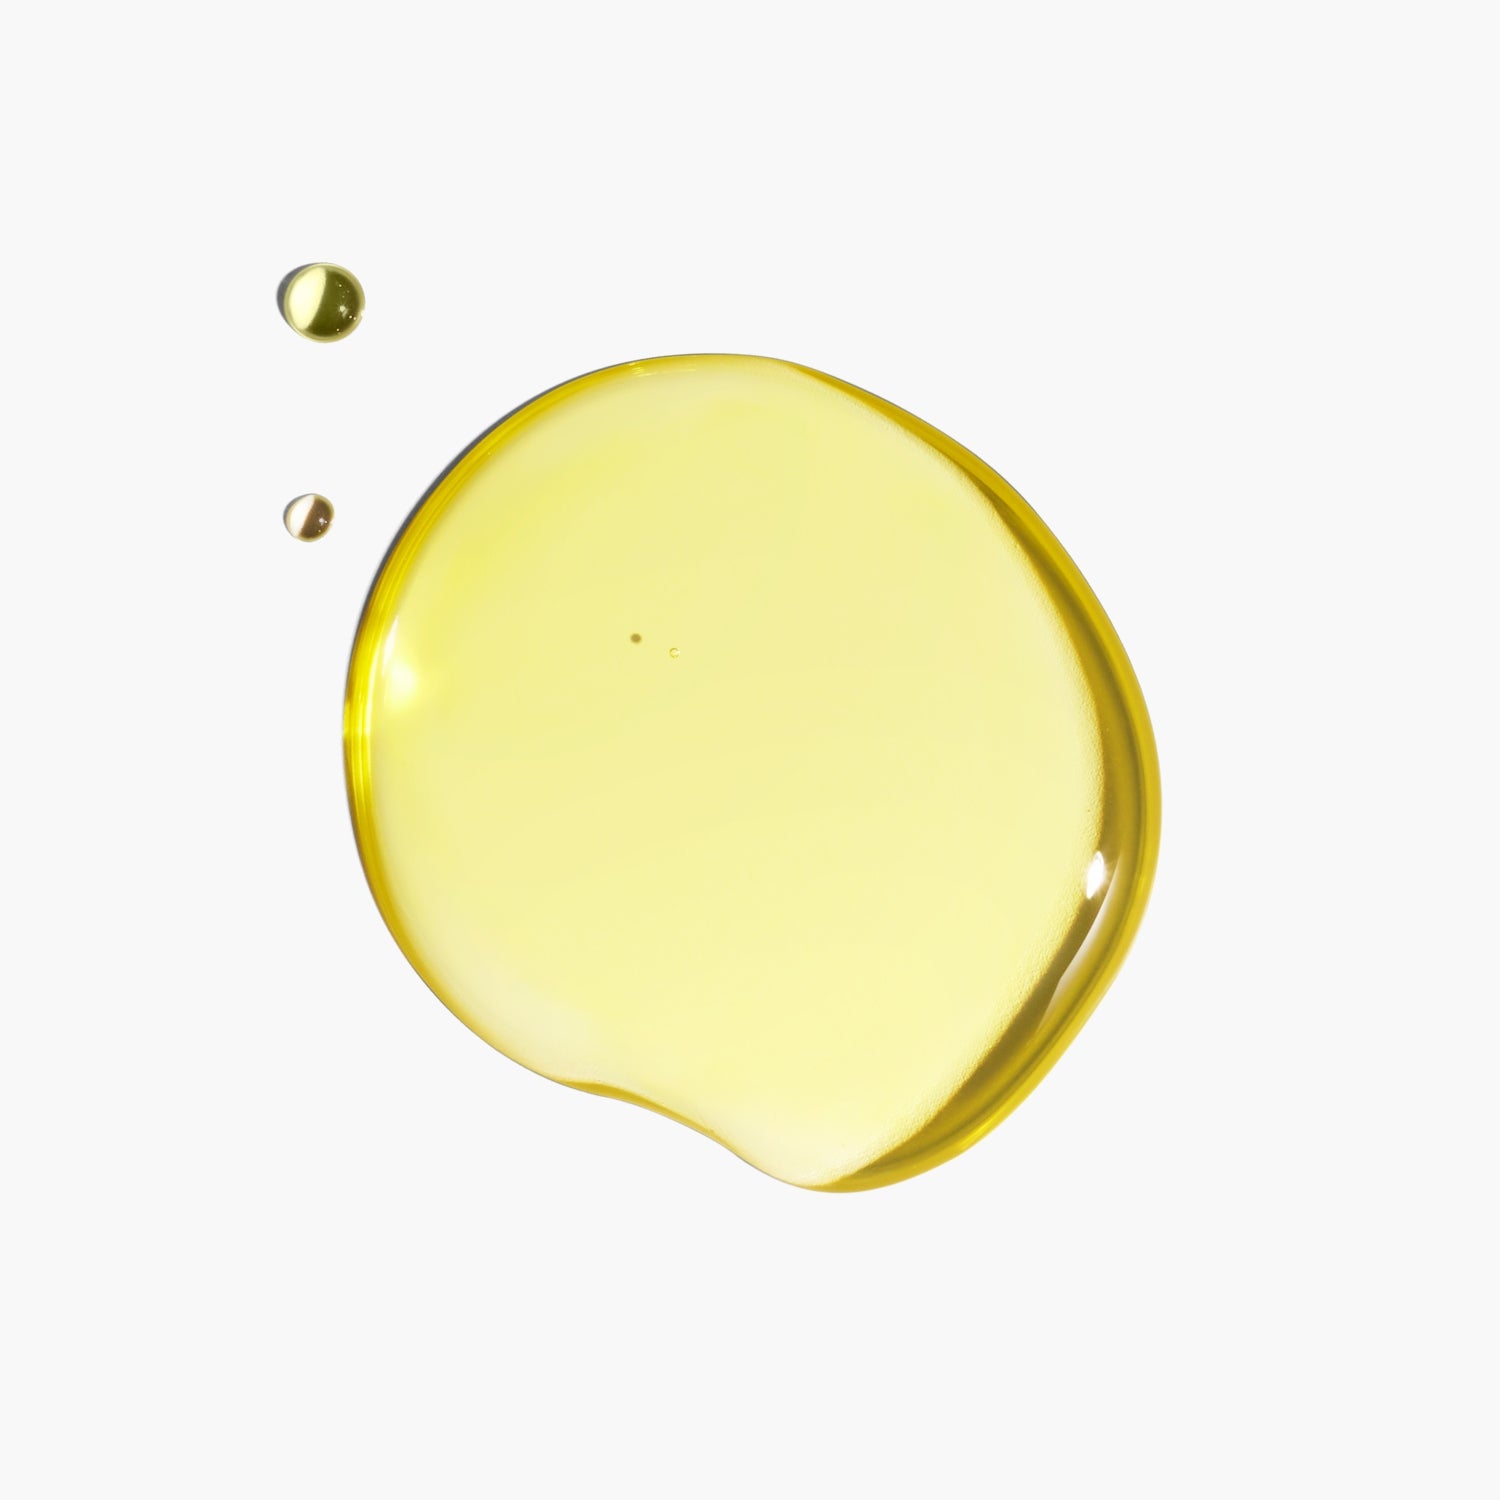 Golden yellow drops of Orchid Facial Oil